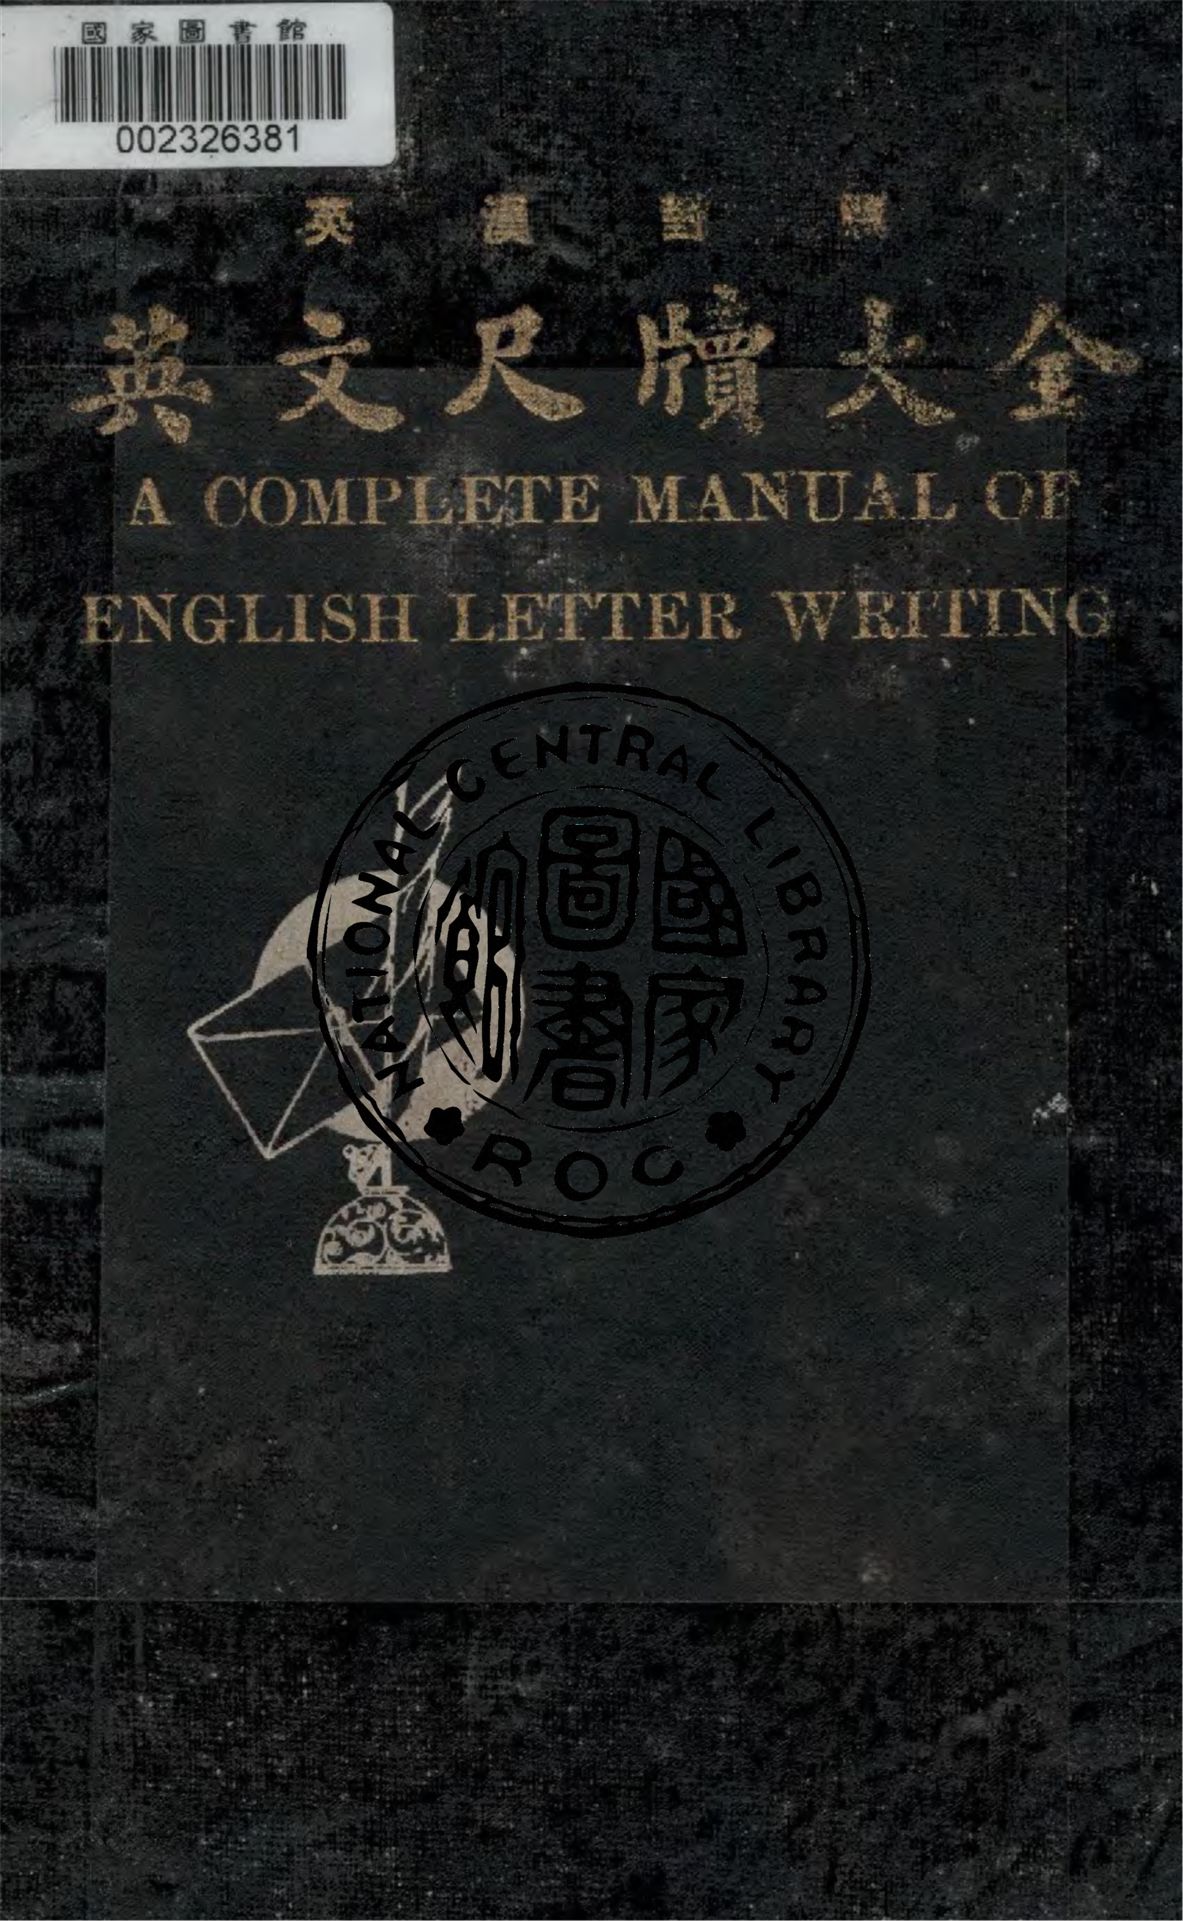 A complete manual of English letter writing